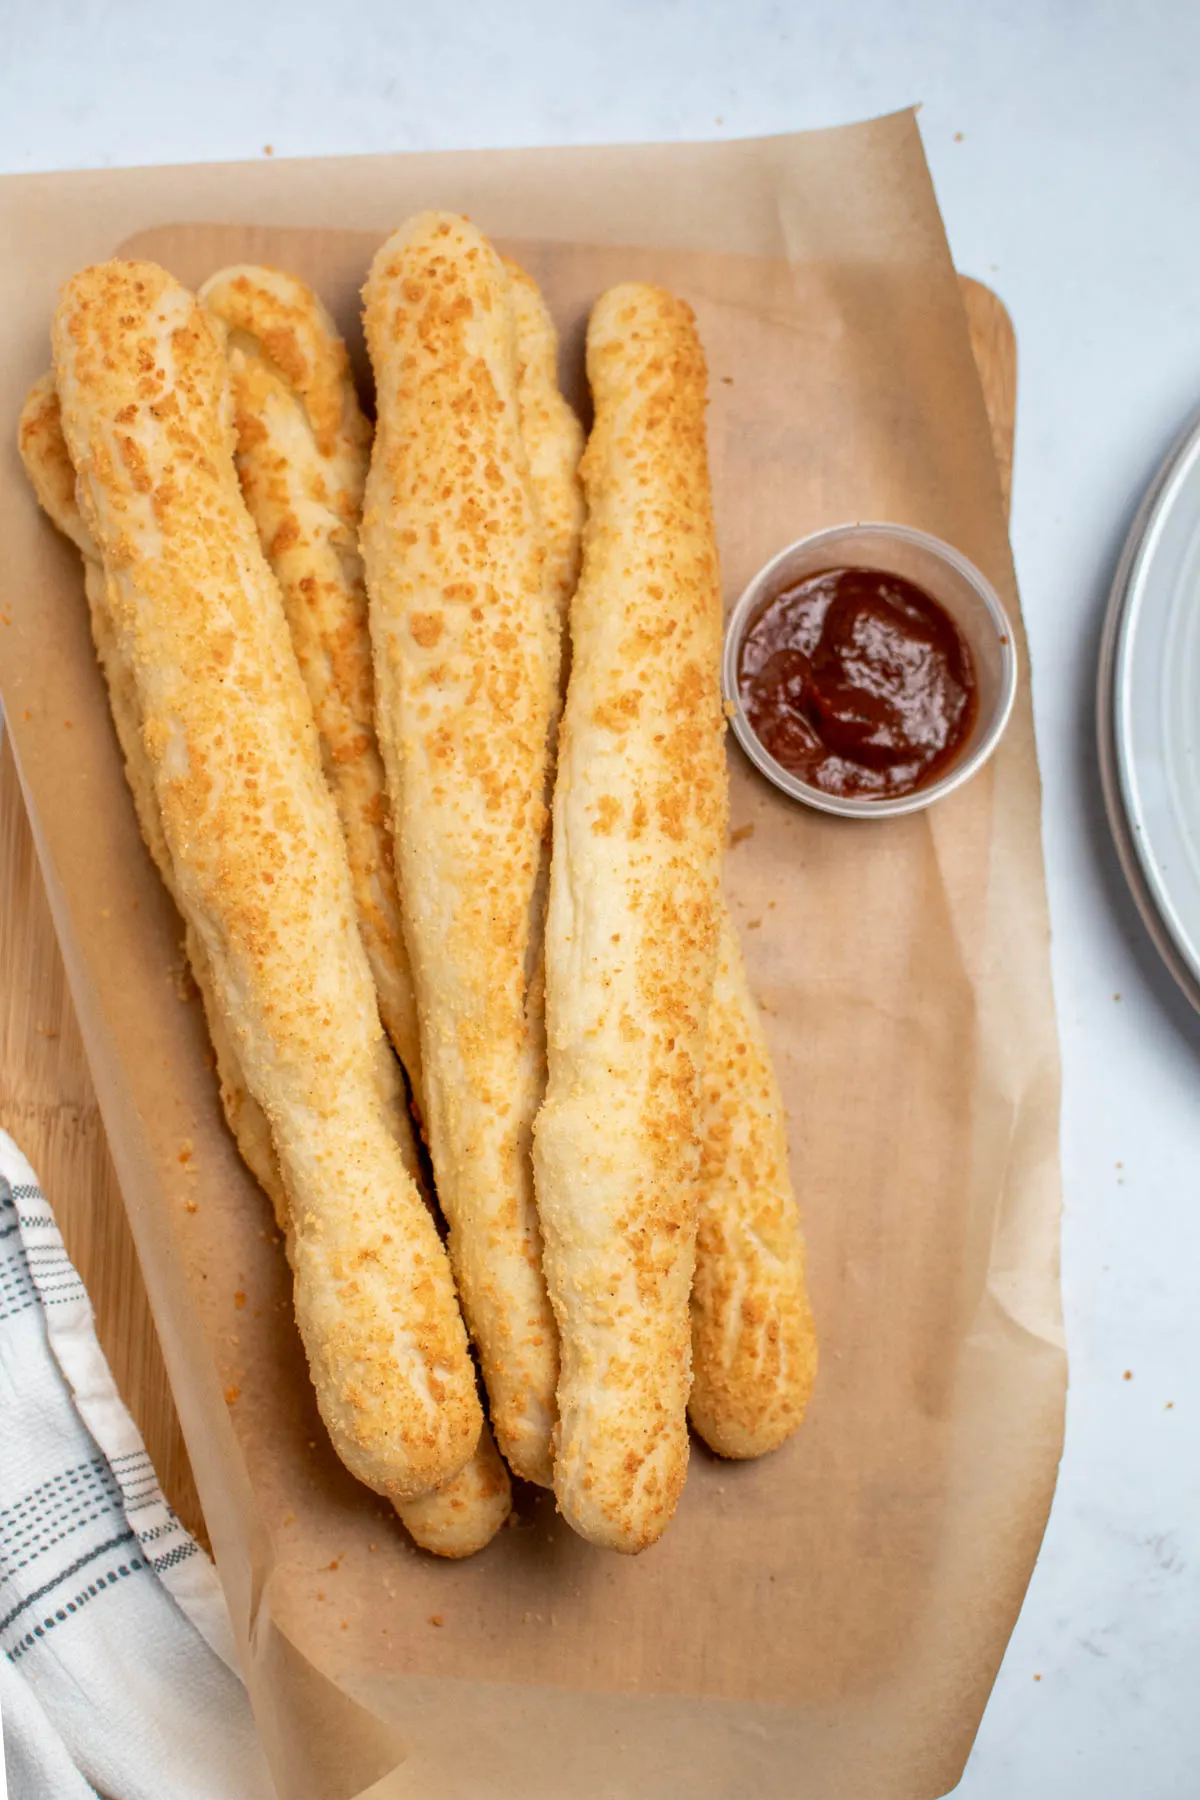 Several parmesan cheese breadsticks on parchment paper with small cup of marinara sauce nearby.